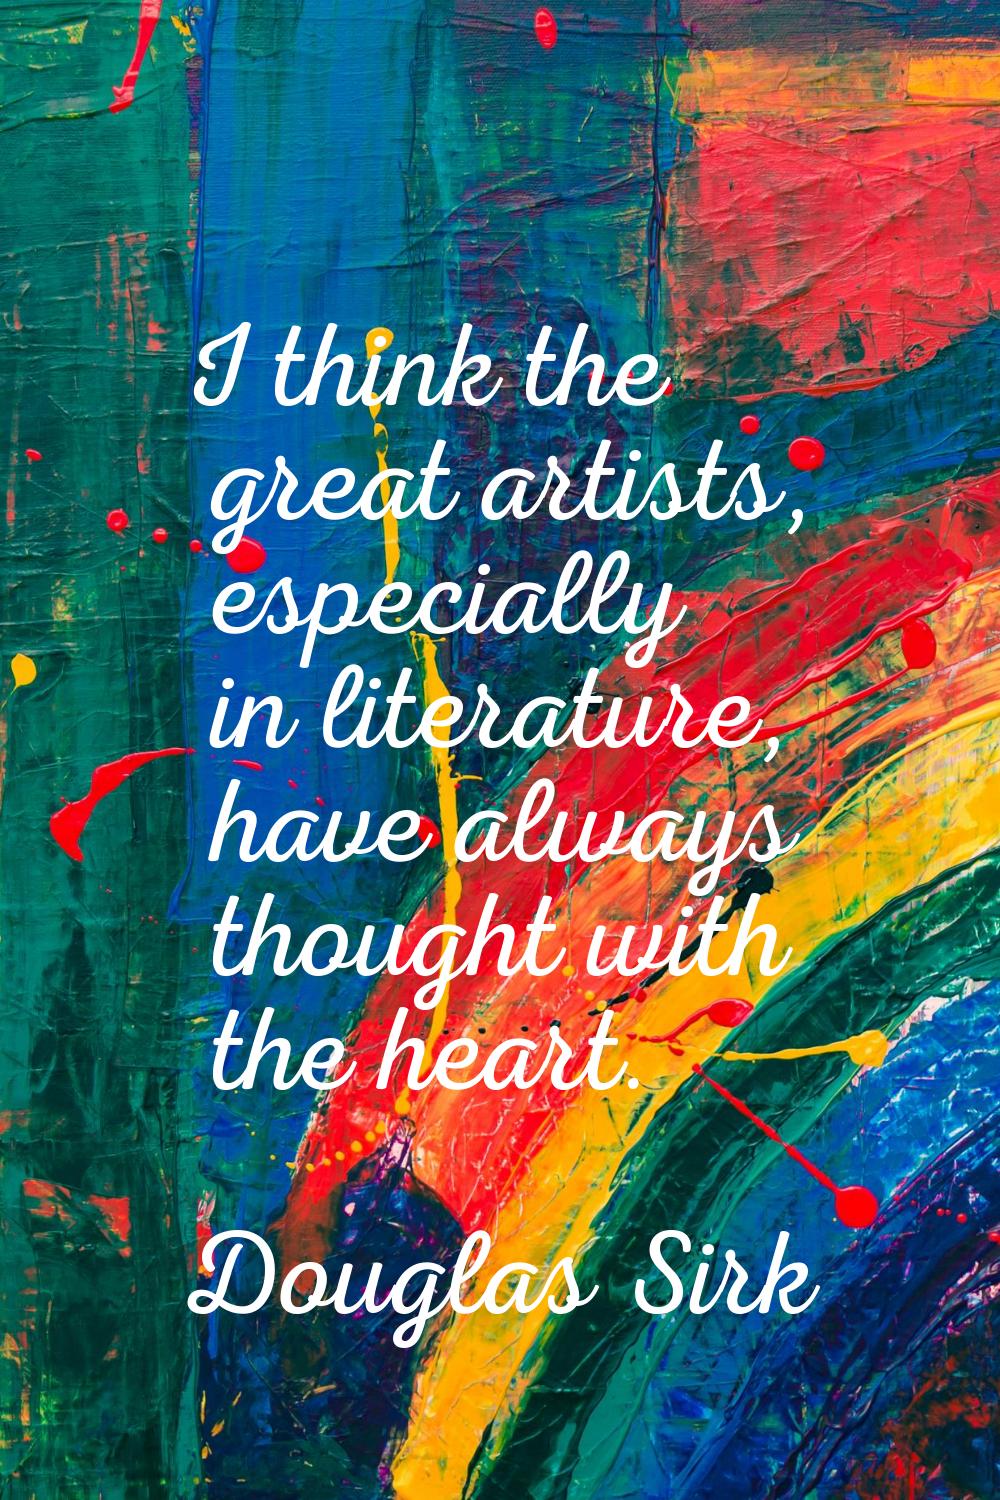 I think the great artists, especially in literature, have always thought with the heart.